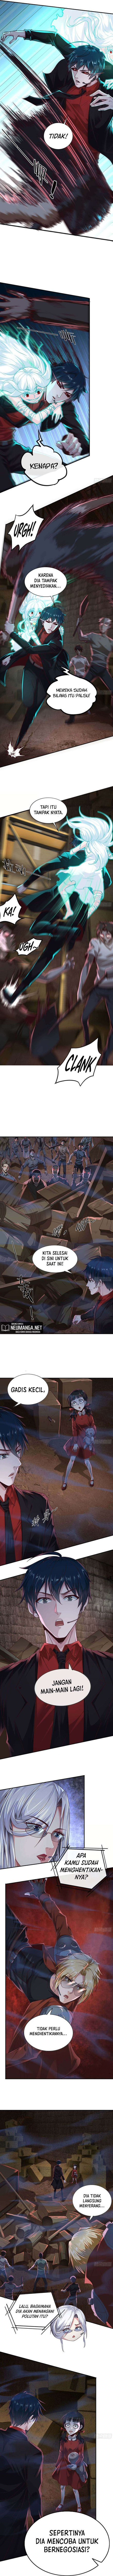 Since The Red Moon Appeared (Hongyue Start) Chapter 28